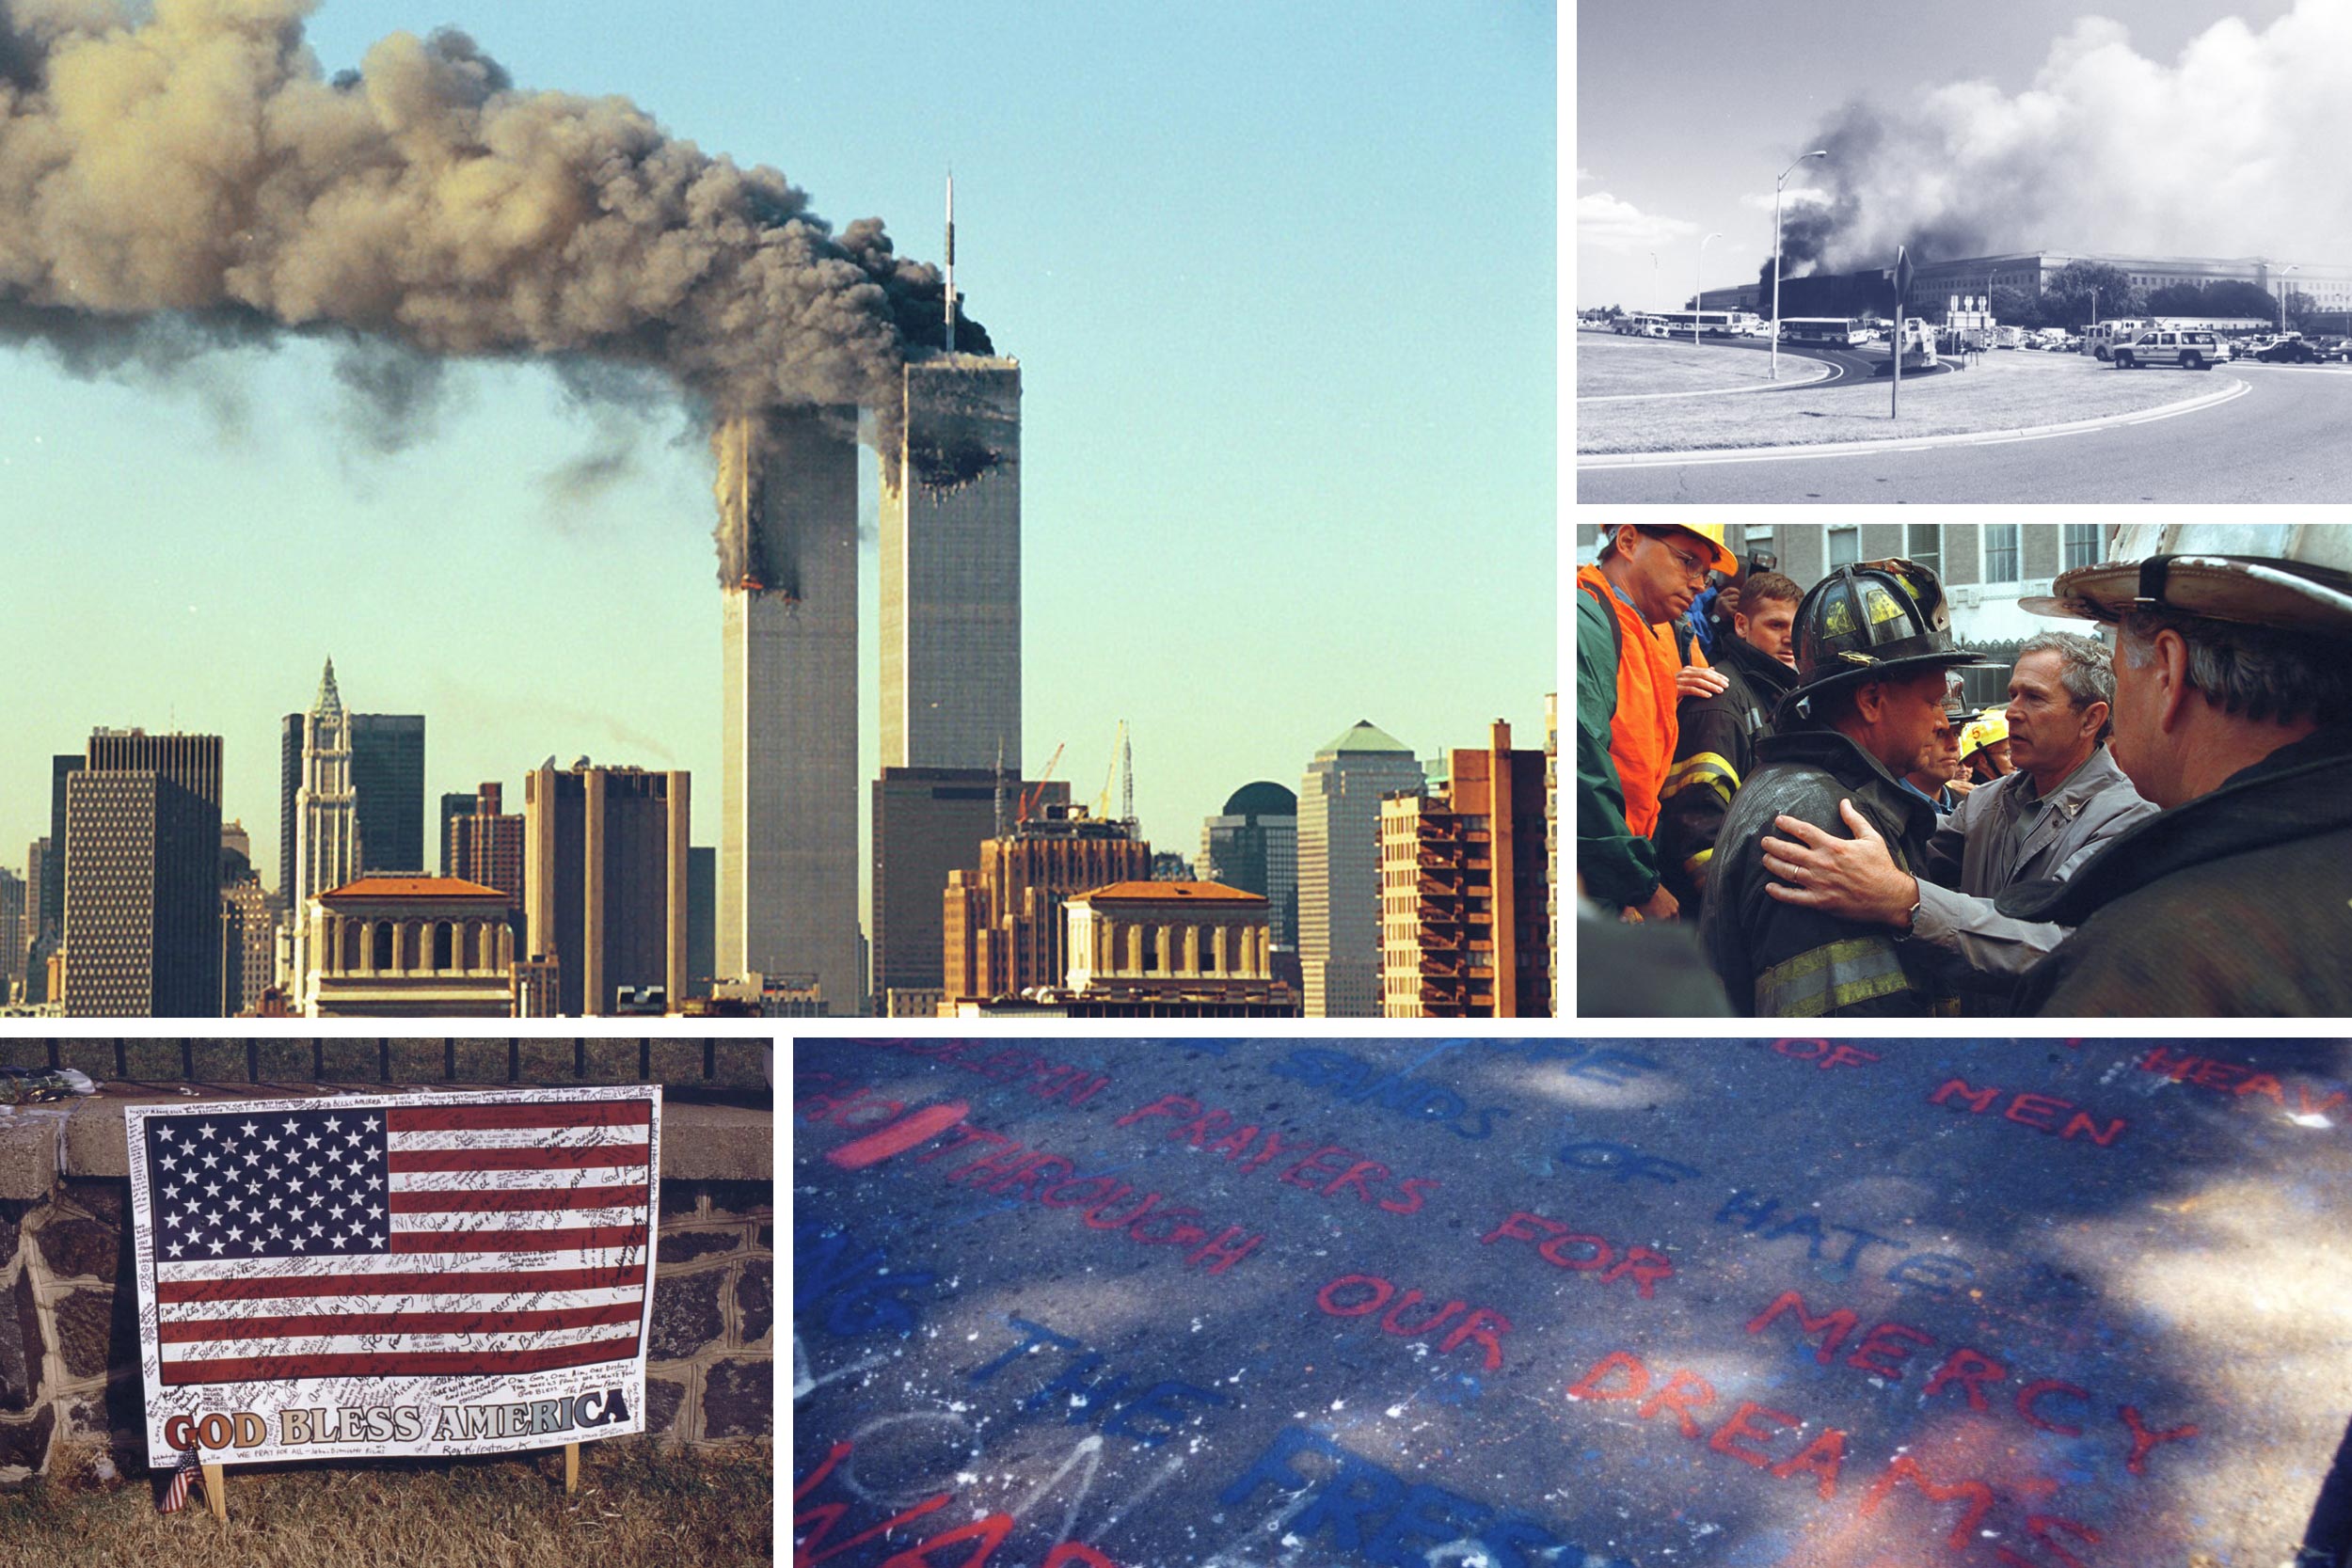 Collage of images from 9/11